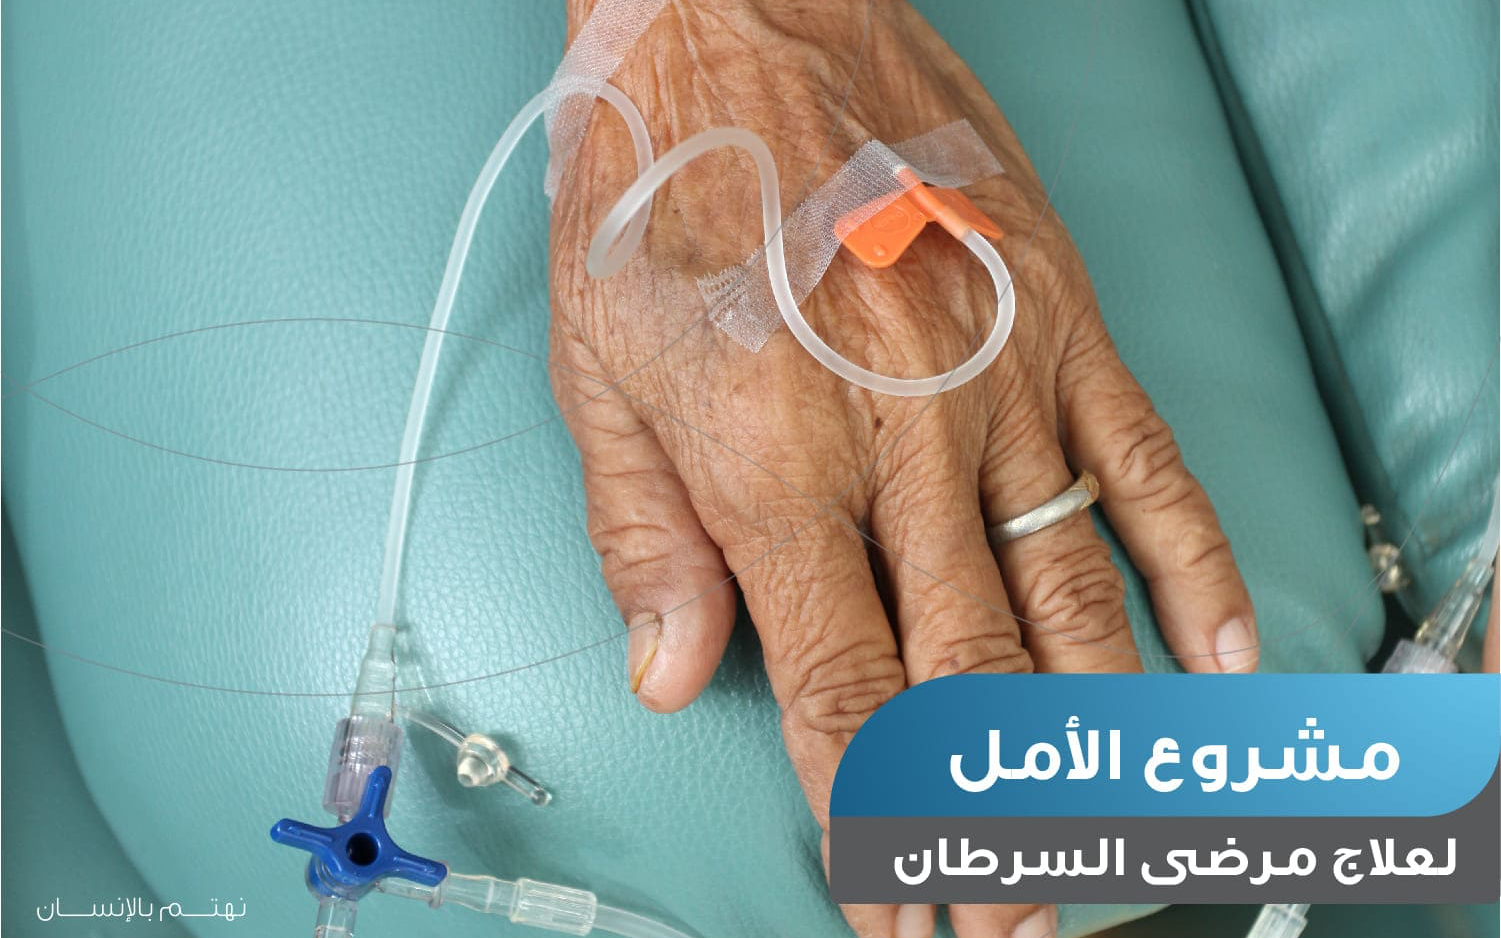 Hope Project - Cancer Patients in Kuwait - photo